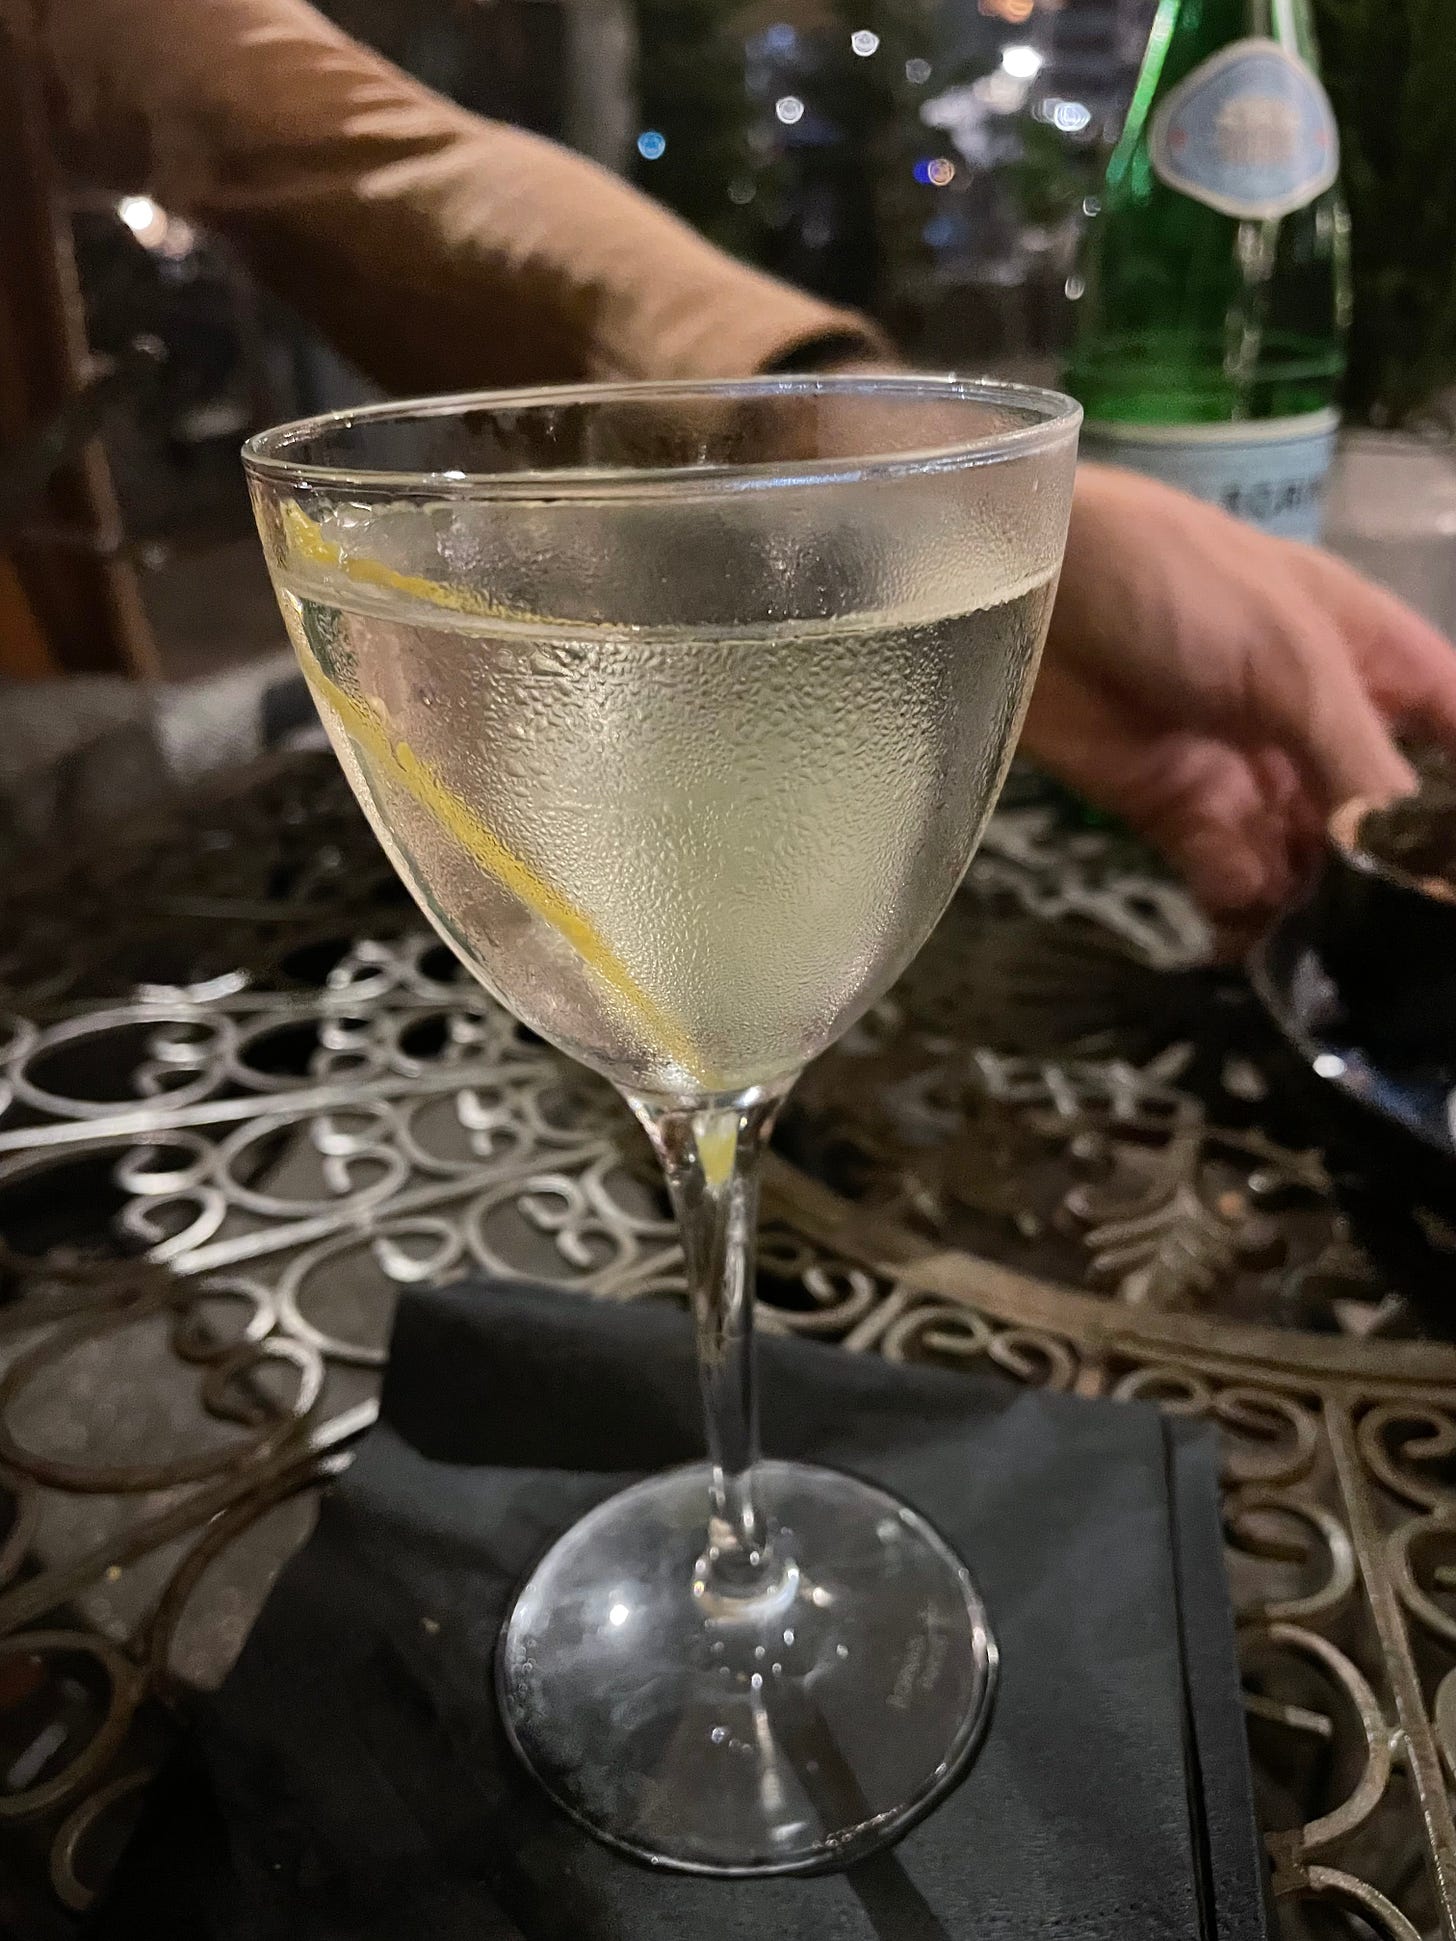 gin martini in a coupe glass with a lemon twist, on a wrought-iron table. A hand of a fellow diner and a bottle of sparkling water in the background.